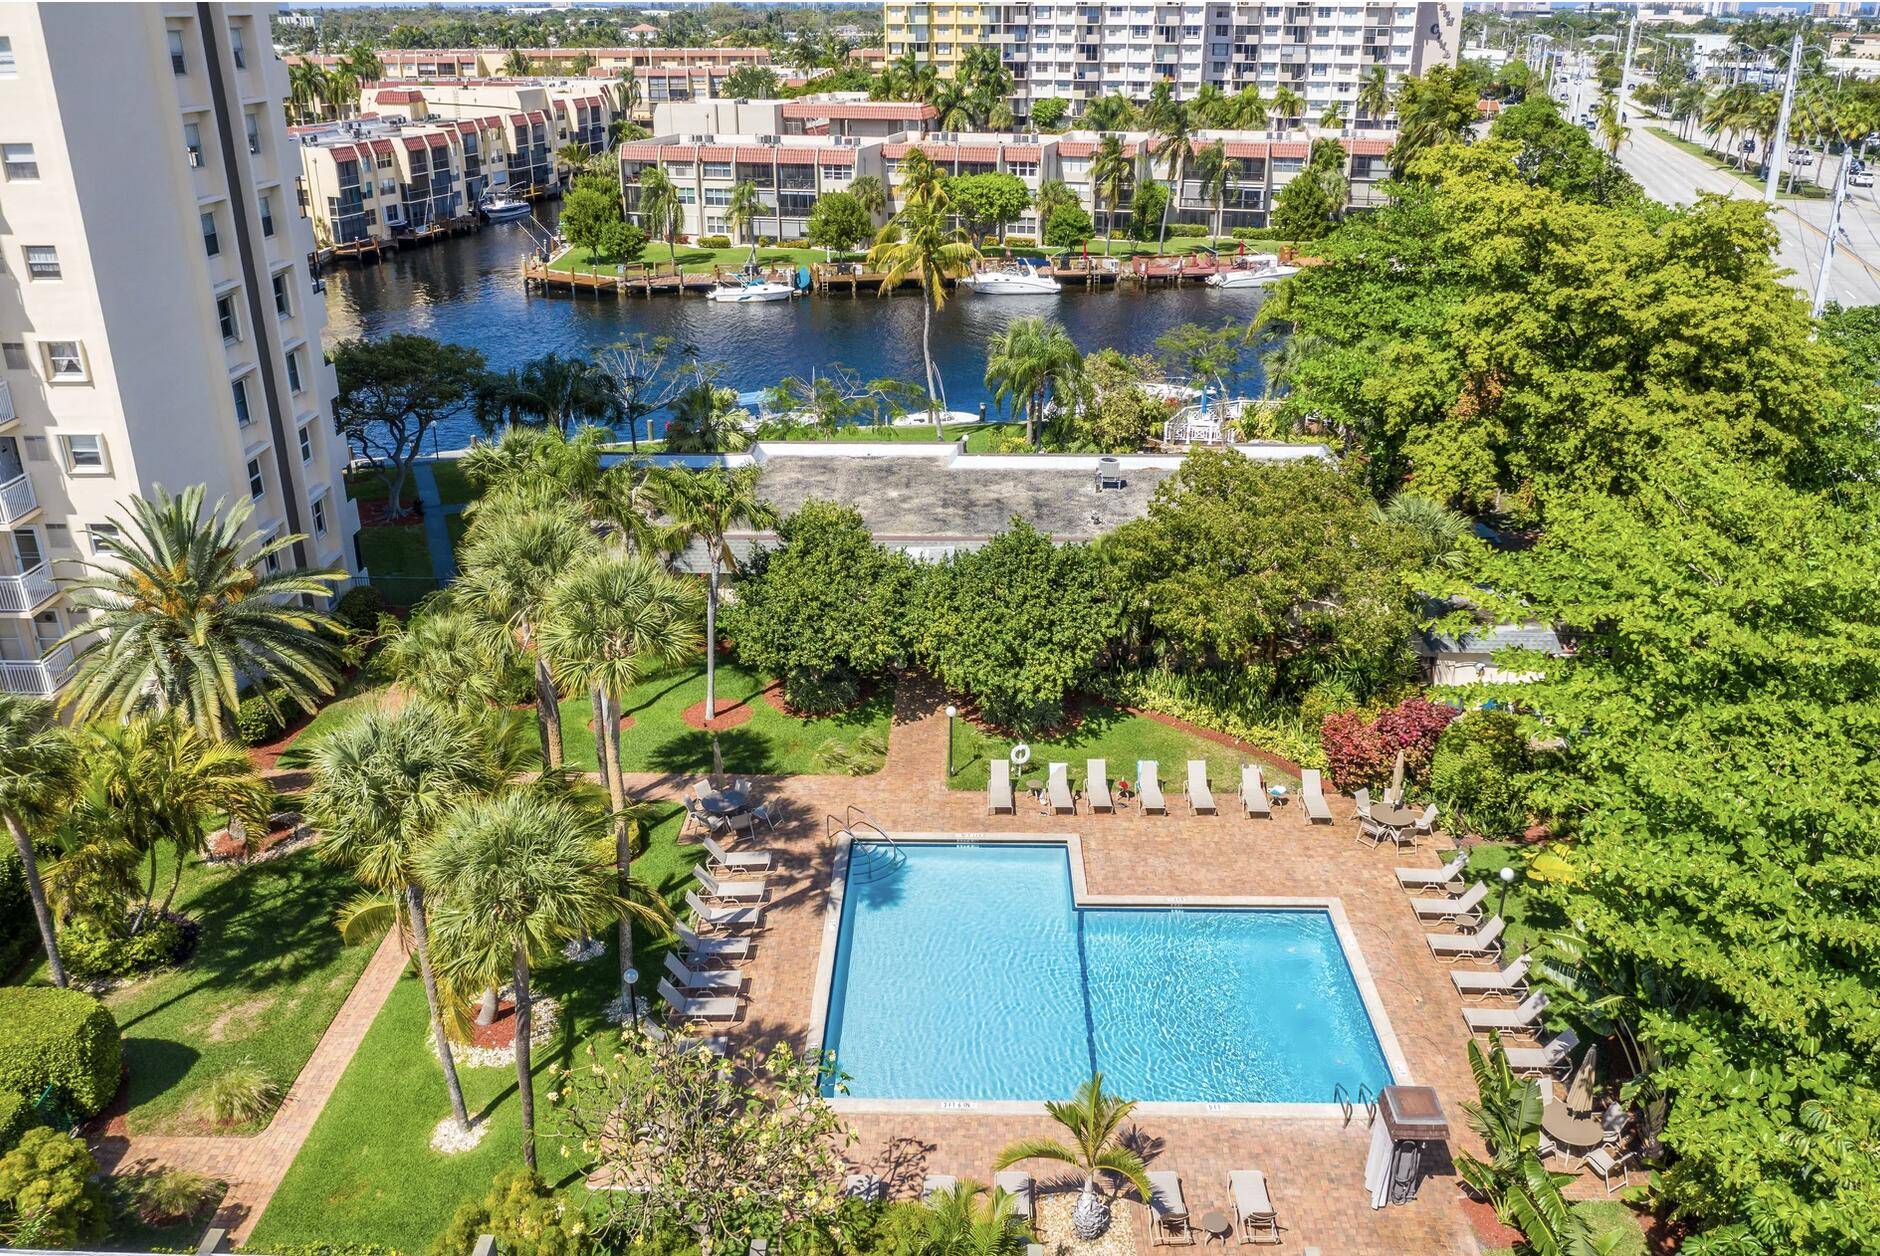 Discover coastal living in this amazing 2 bedroom, 2 bathroom condo with amazing views of Florida's Intracoastal waters.